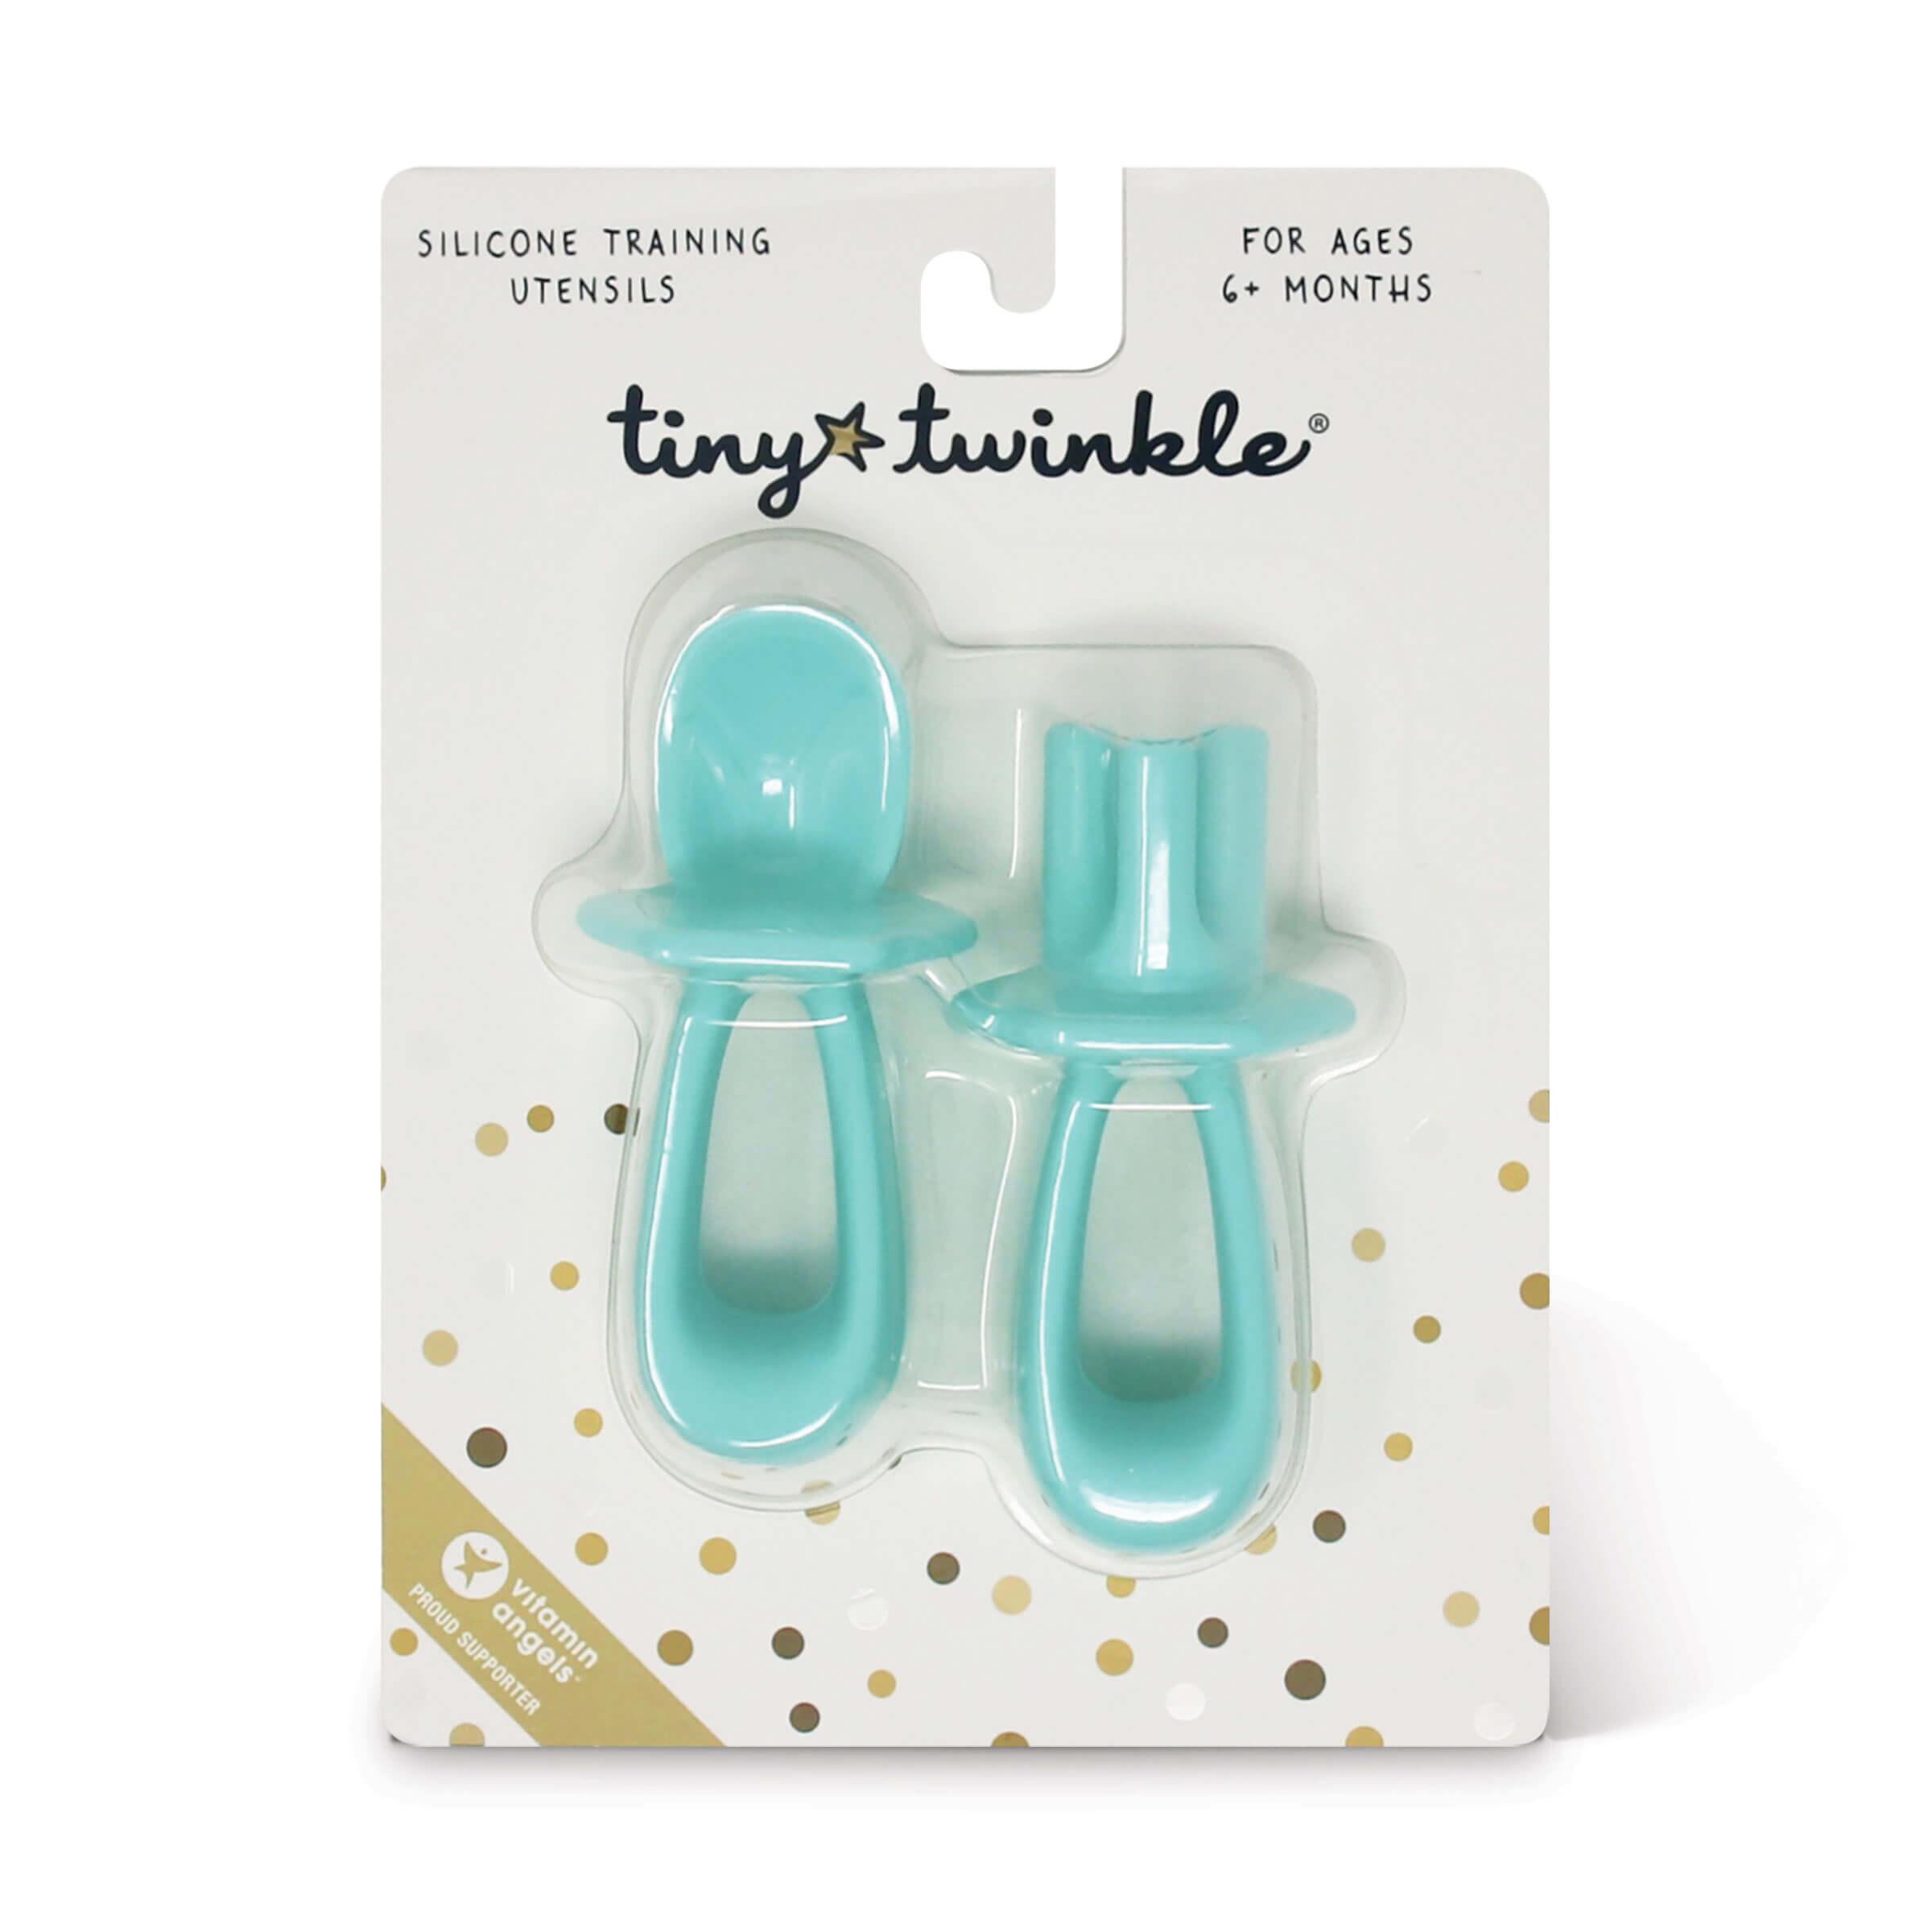 Tiny Twinkle Silicone Training Utensil | The Nest Attachment Parenting Hub